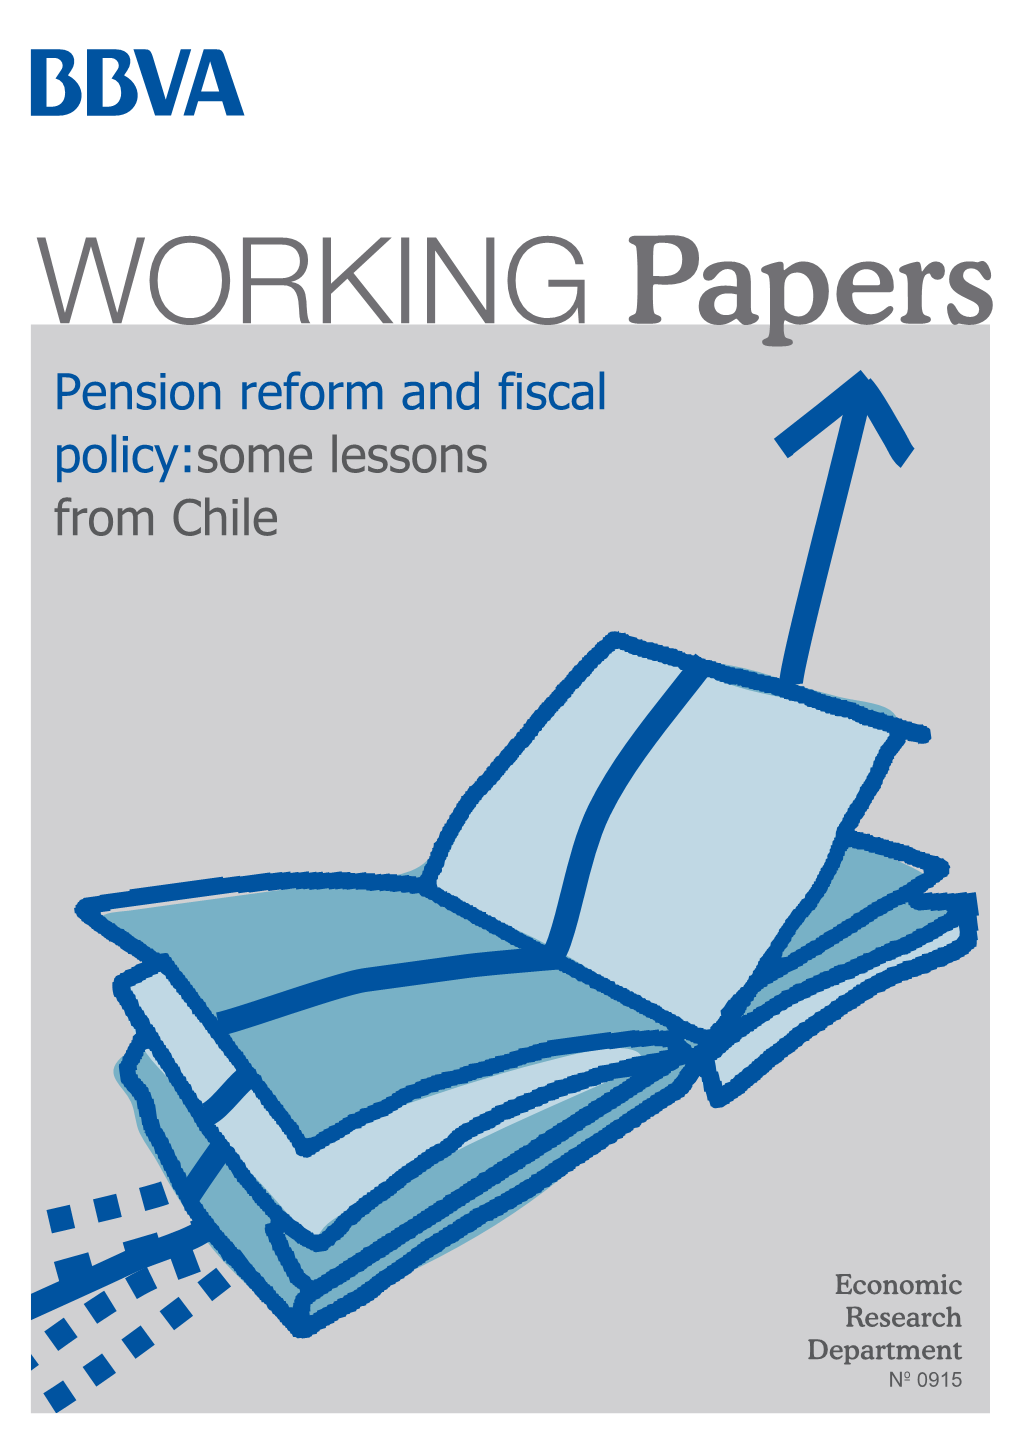 Pension Reform and Fiscal Policy:Some Lessons from Chile